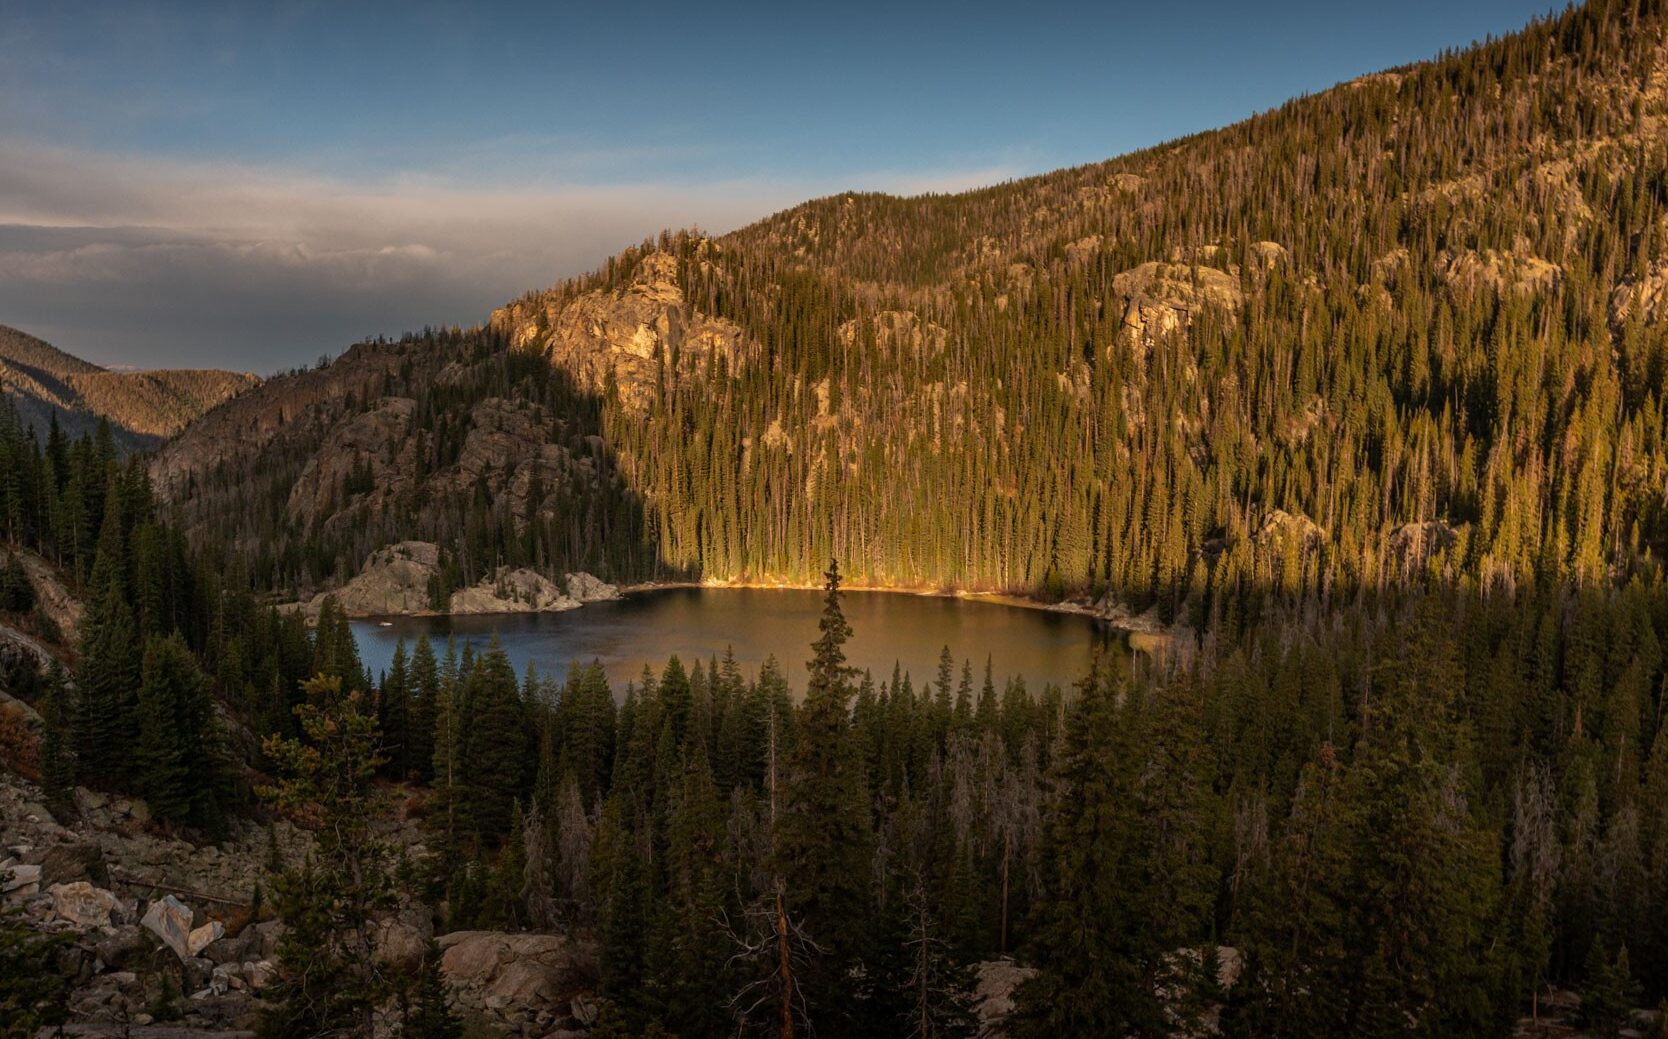 Early Morning sunlight illuminates Lone Pine Lake and the surrounding forest